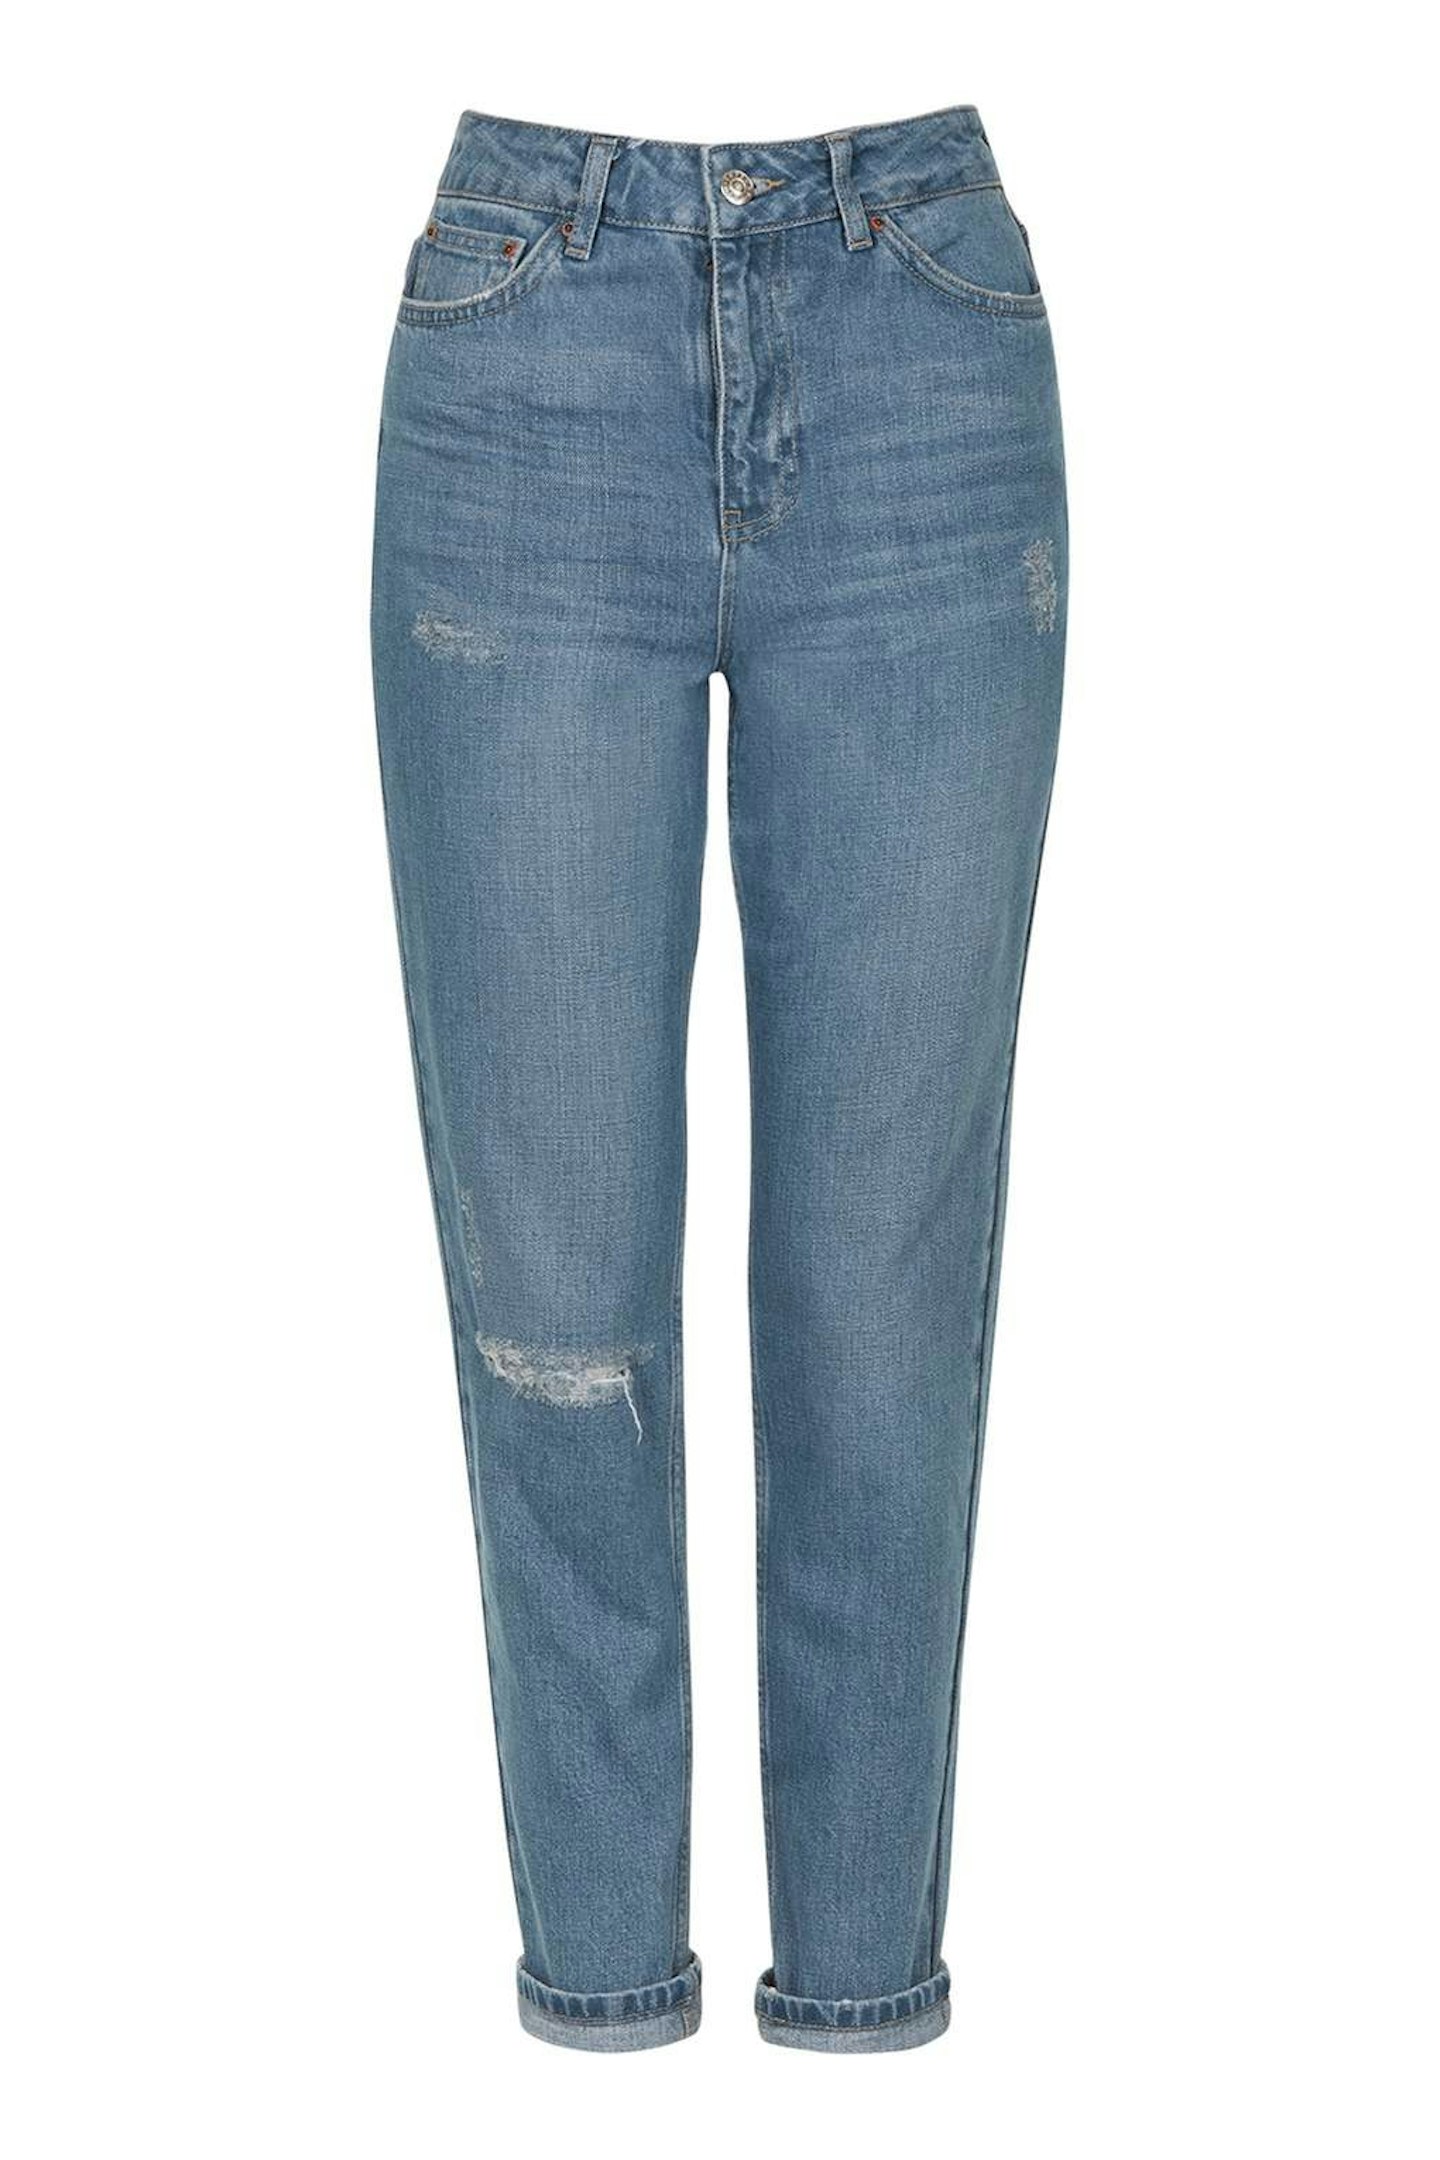 rip mom jeans topshop